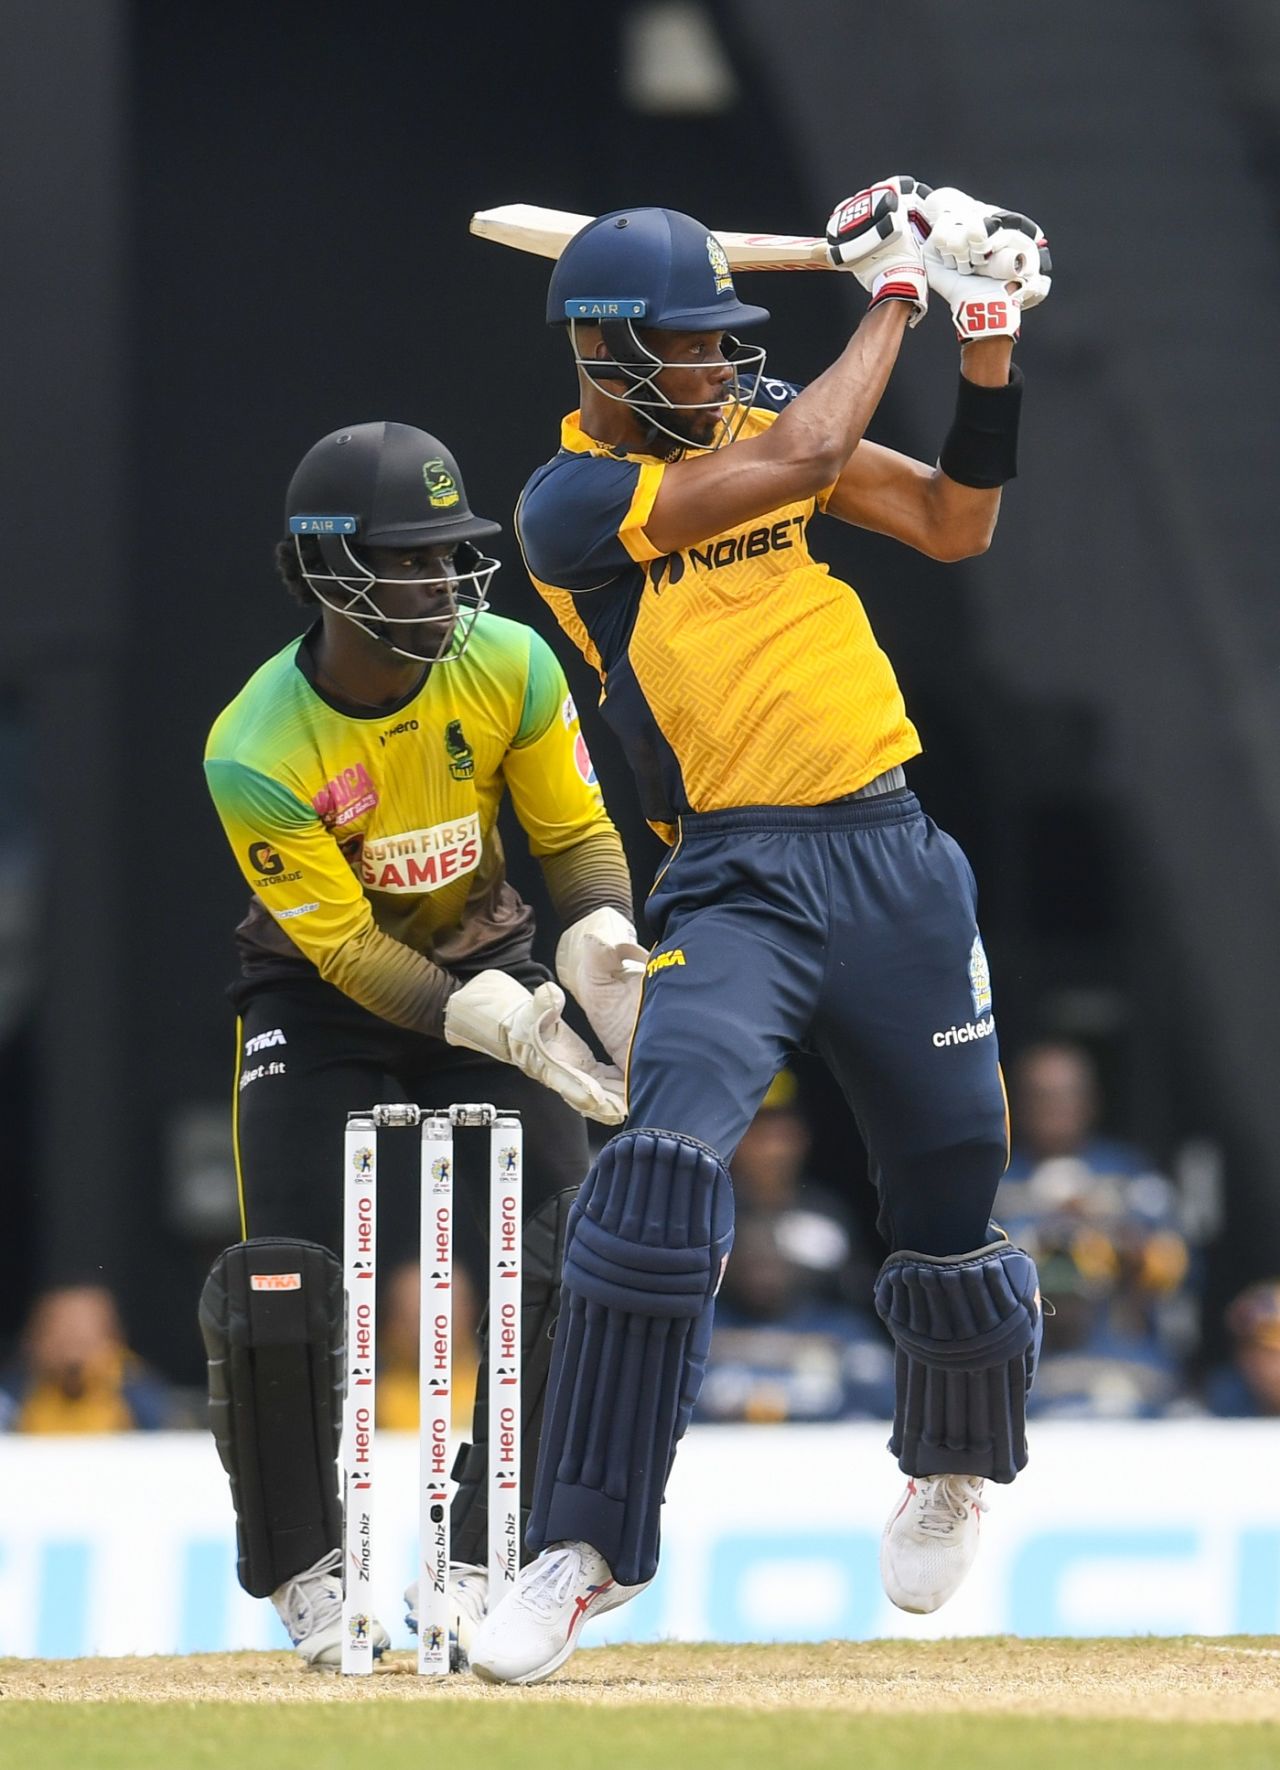 Roston Chase swats one away off the back foot, Jamaica Tallawahs v St Lucia Zouks, Trinidad, CPL 2020, August 19, 2020